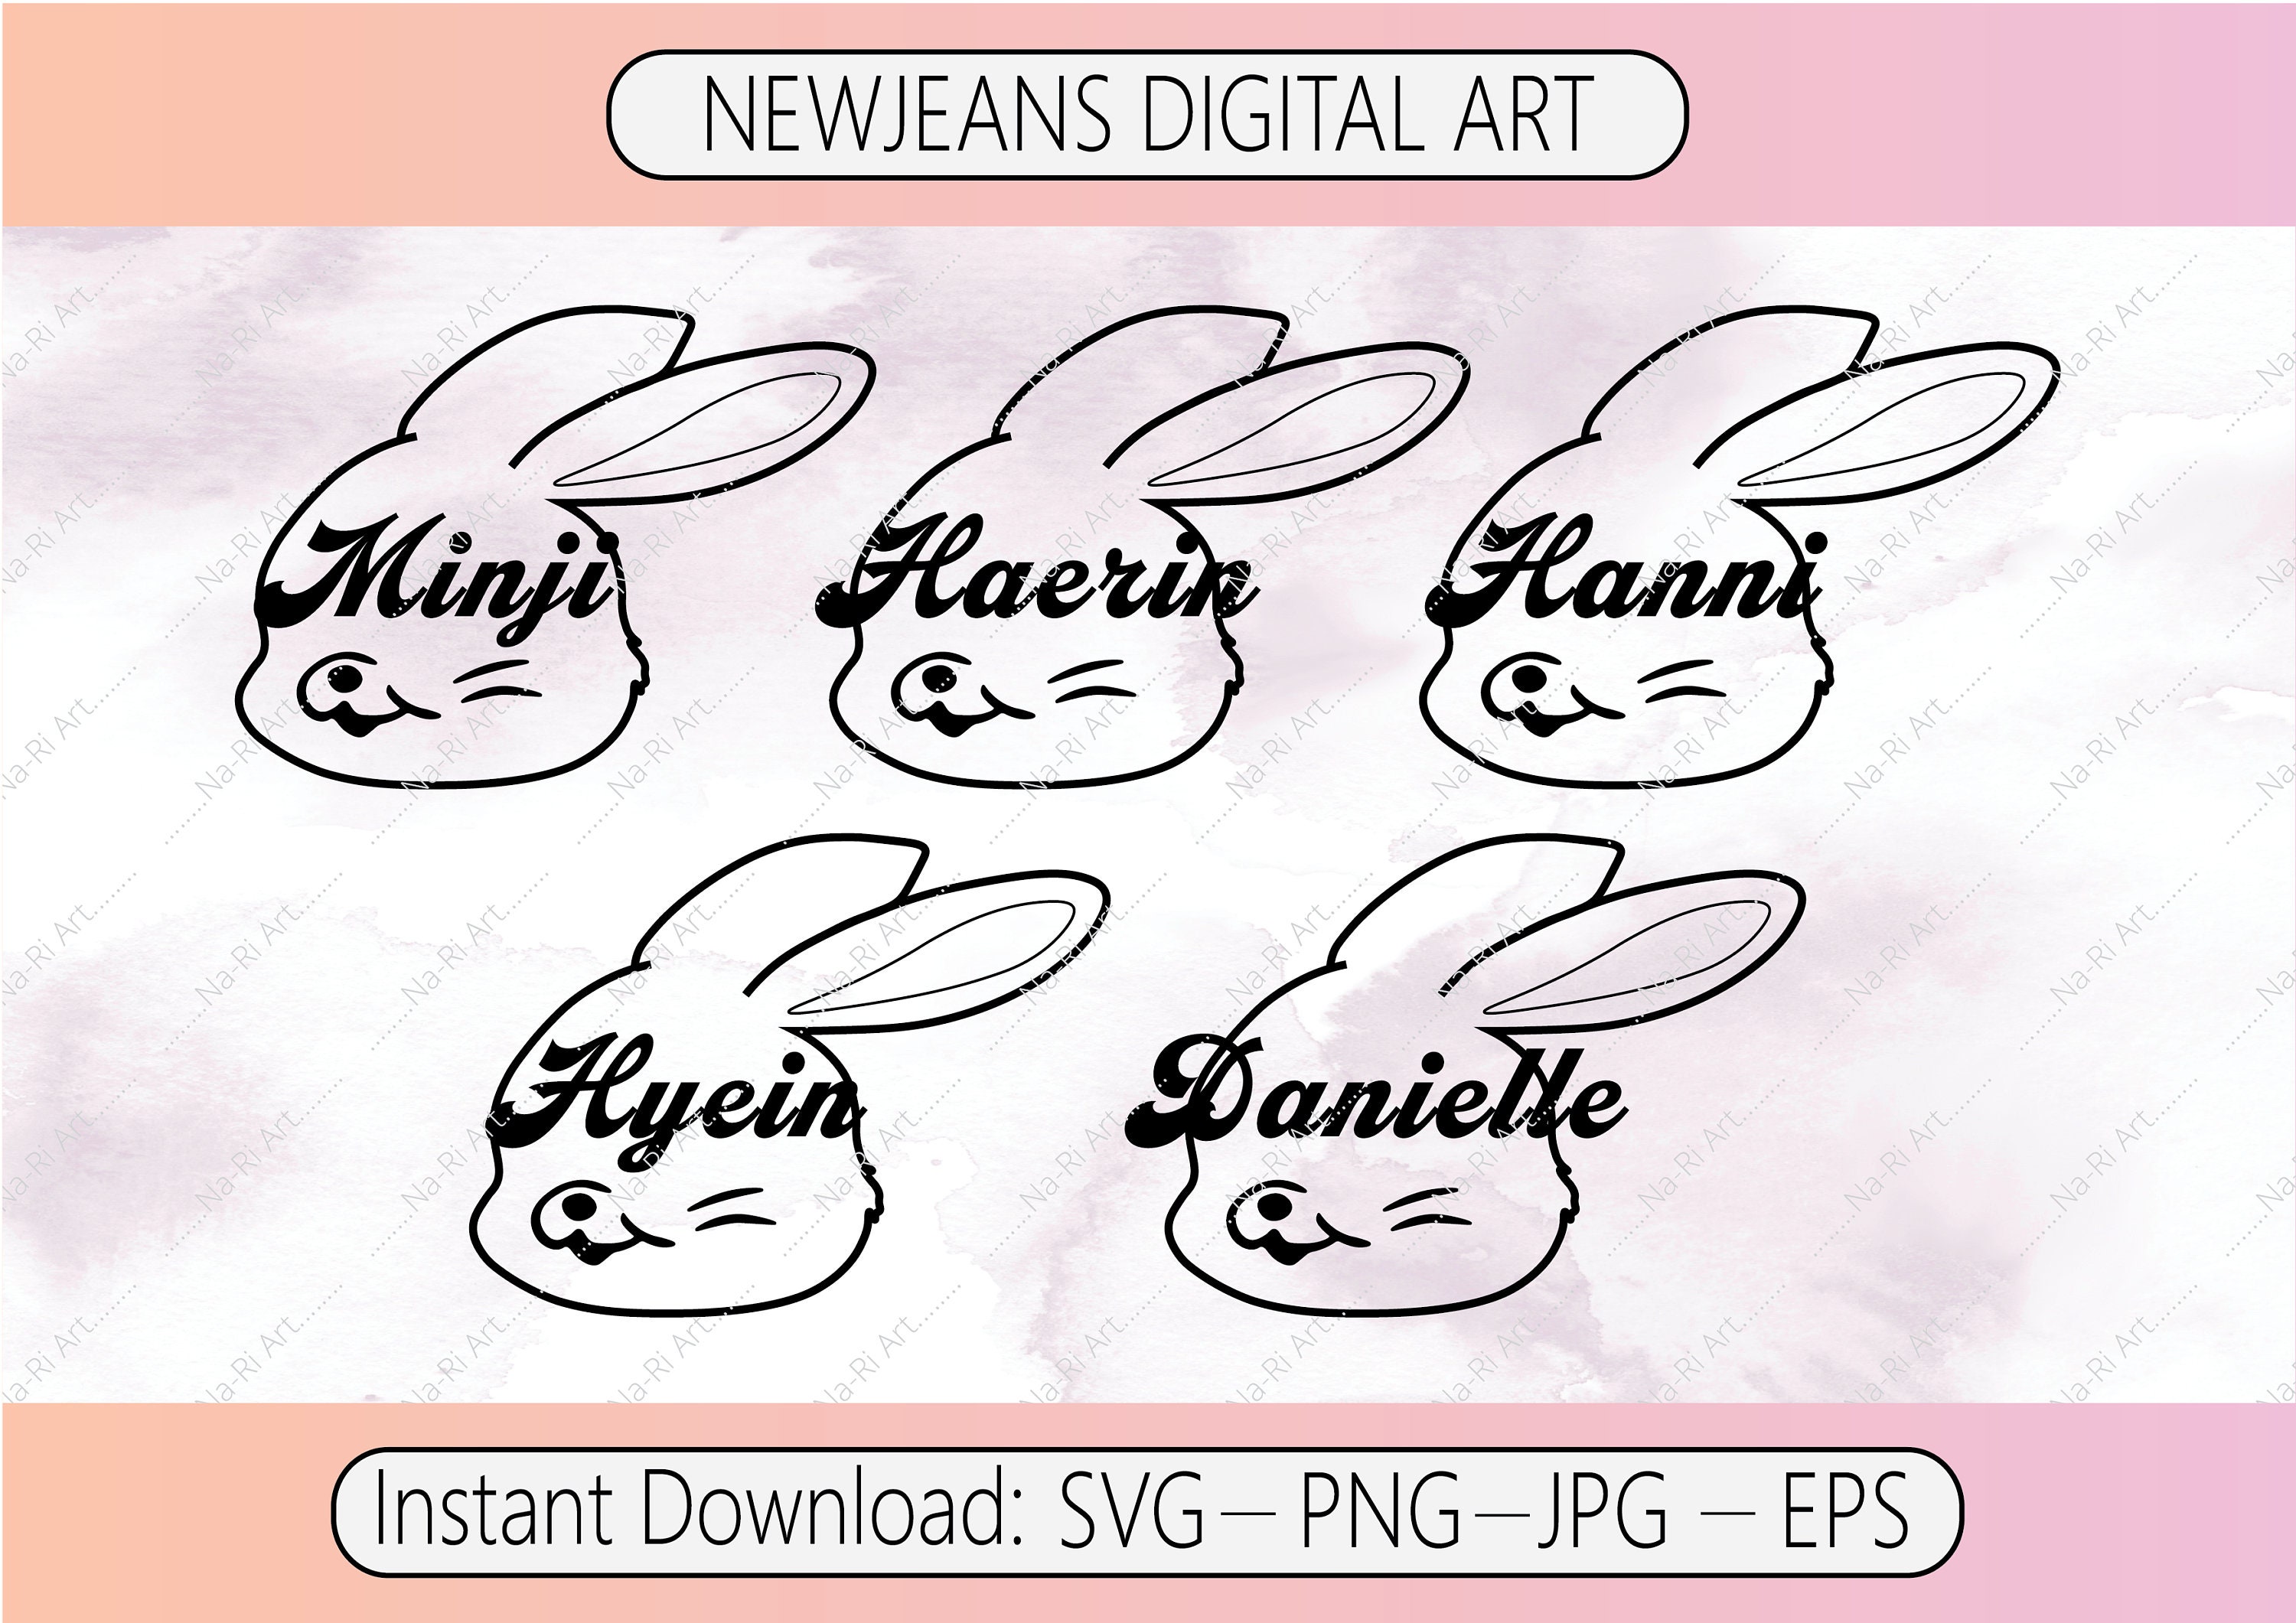 New Jeans Members BUNNY Names SVG Cut Files for Cricut, Silhouette,  Clipart, Bunnies, Silhouette, Logos, Vinyl, Tshirt Prints, Stickers 